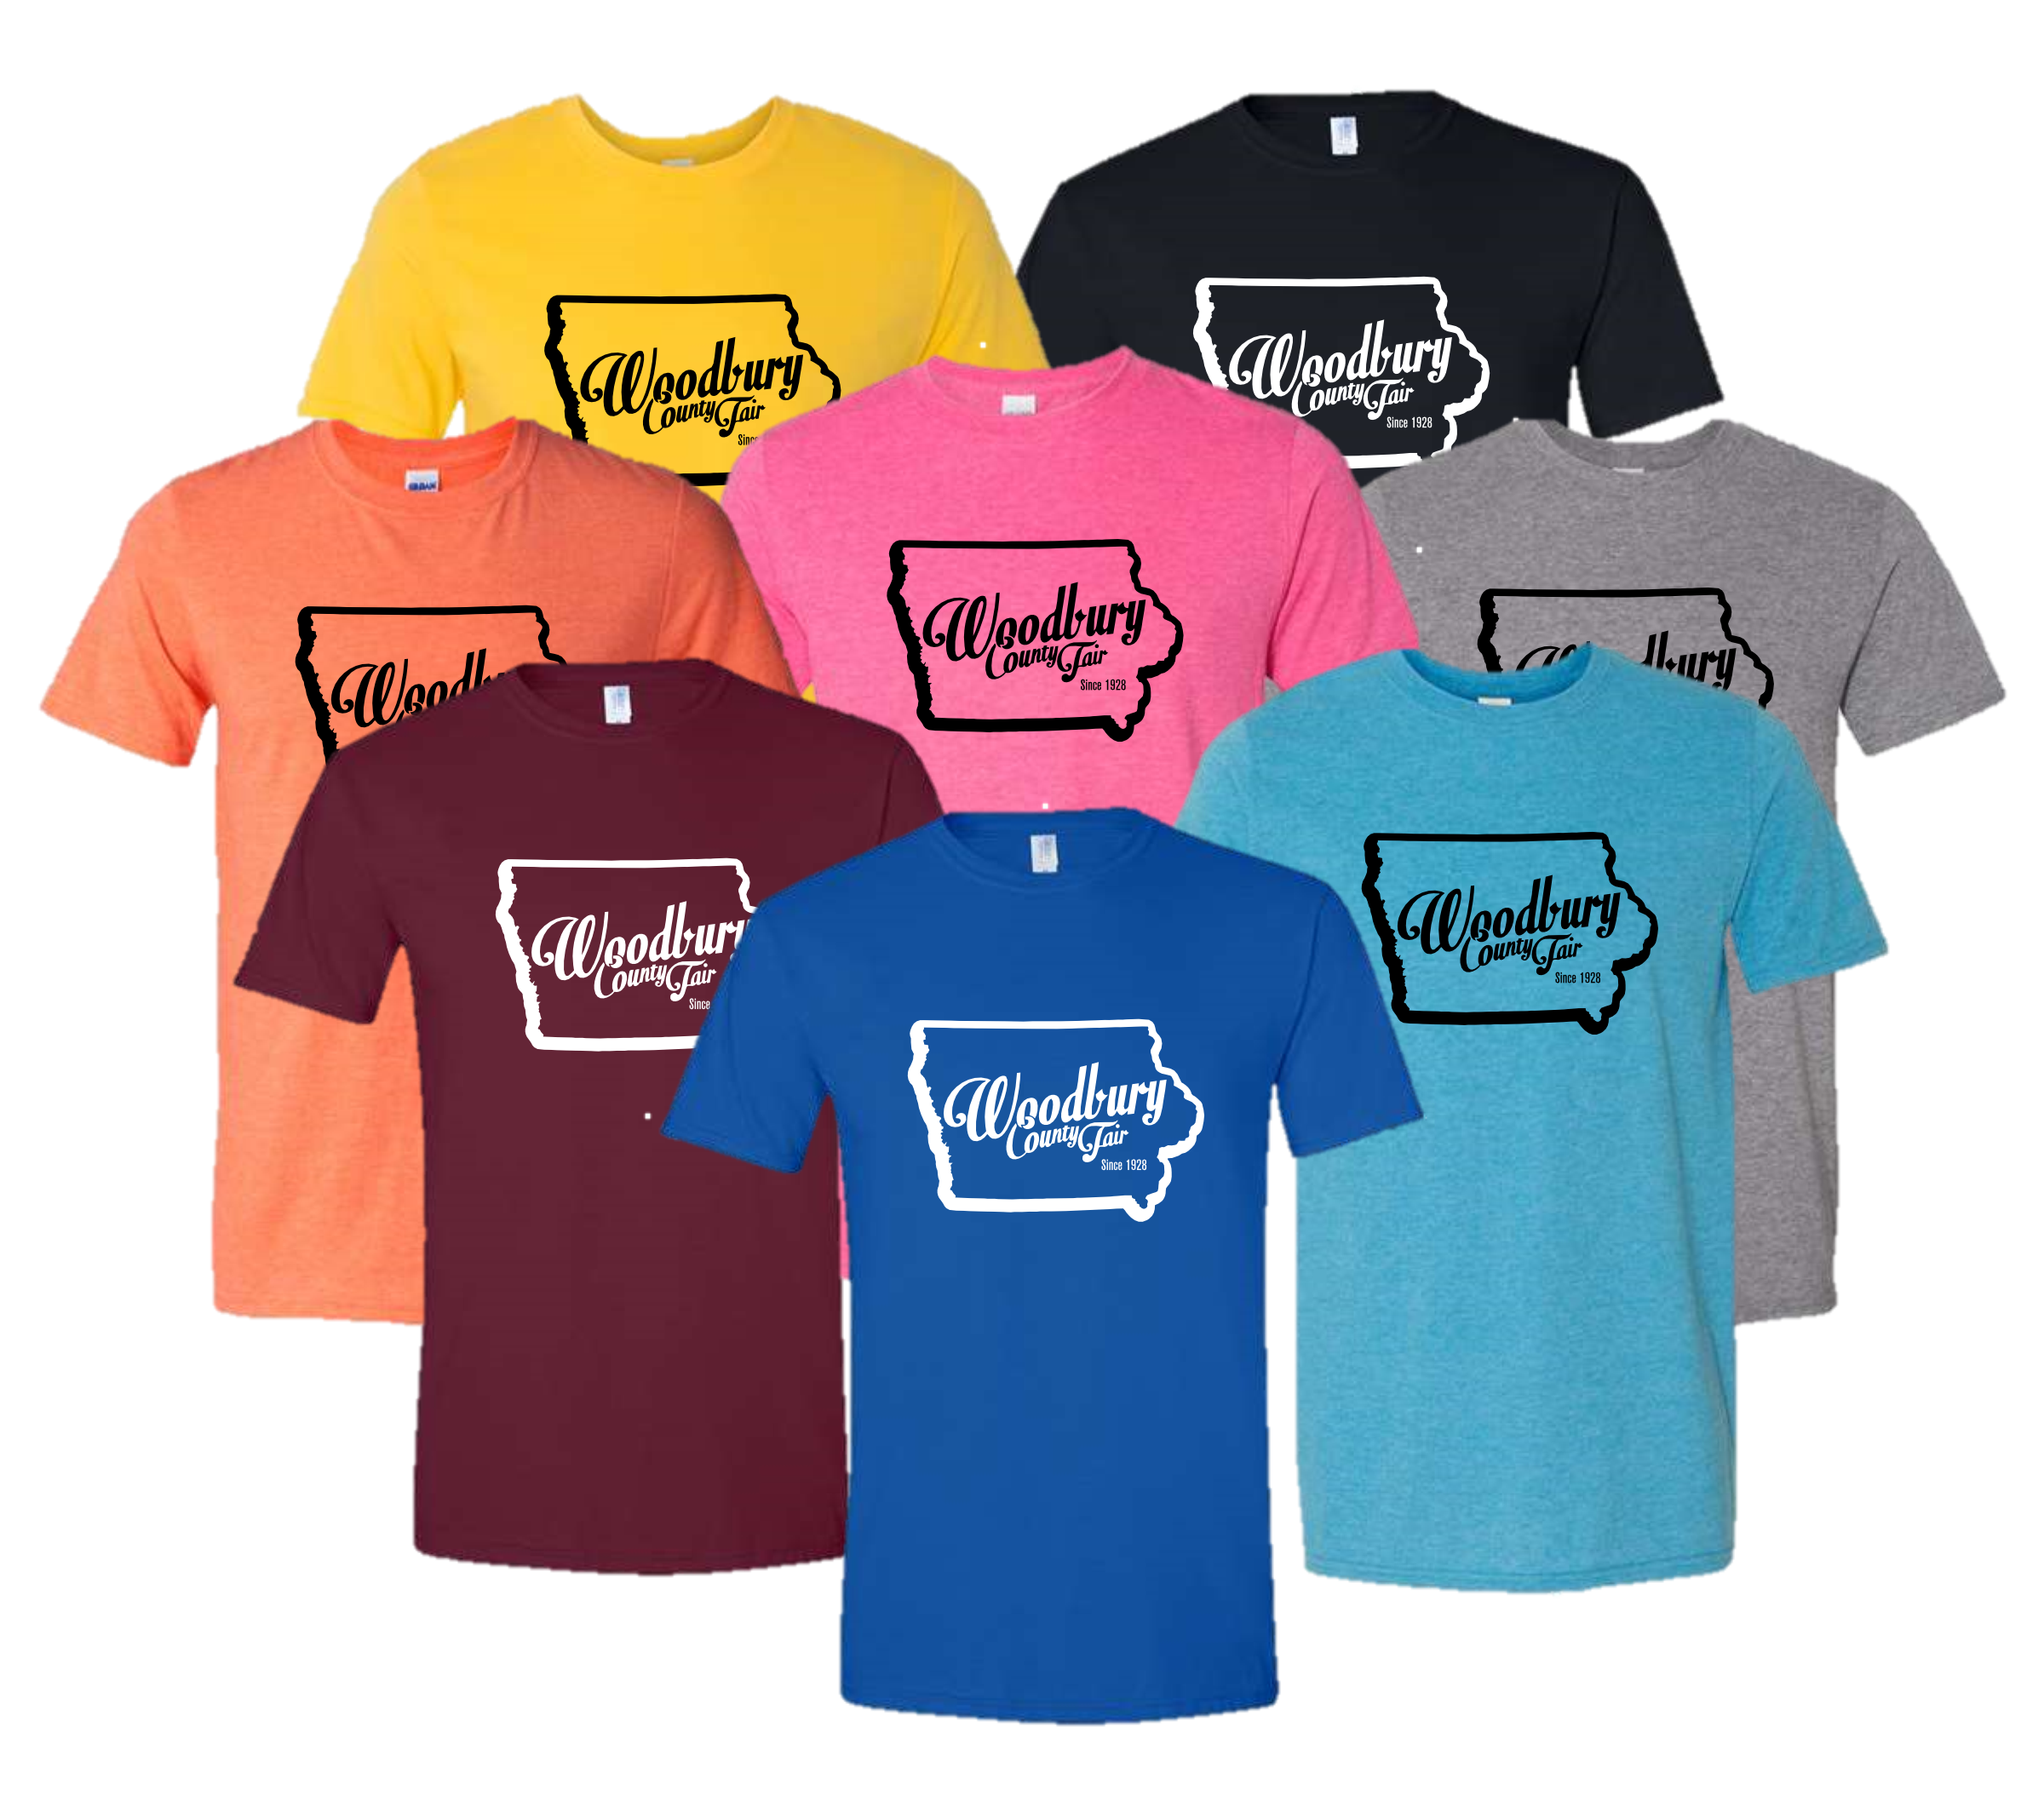 Woodbury County Fair - Unisex Cotton T-Shirt - State Outline